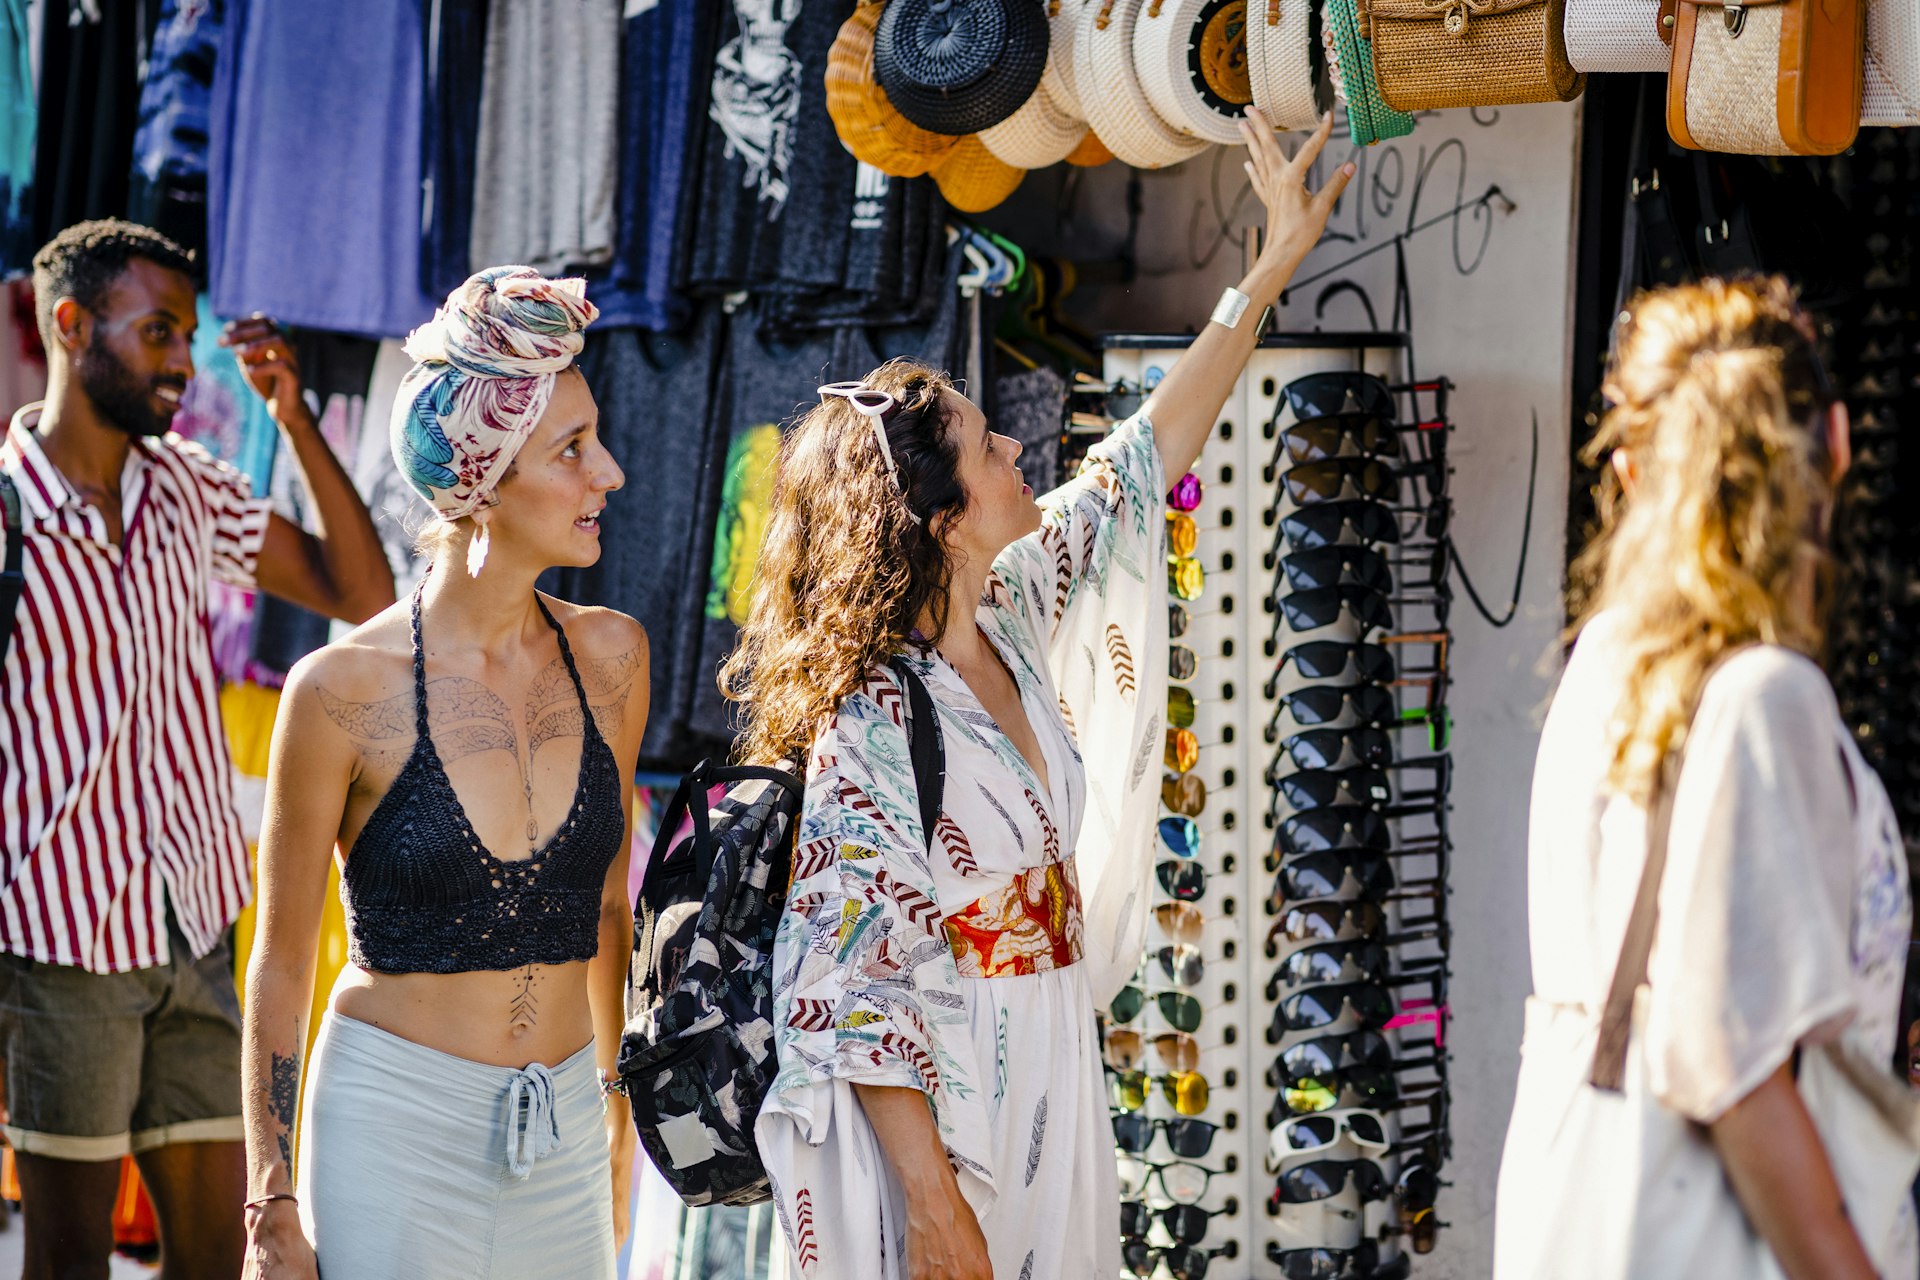 A group of friends browsing merchandise at market stalls while exploring in Bali, Indonesia